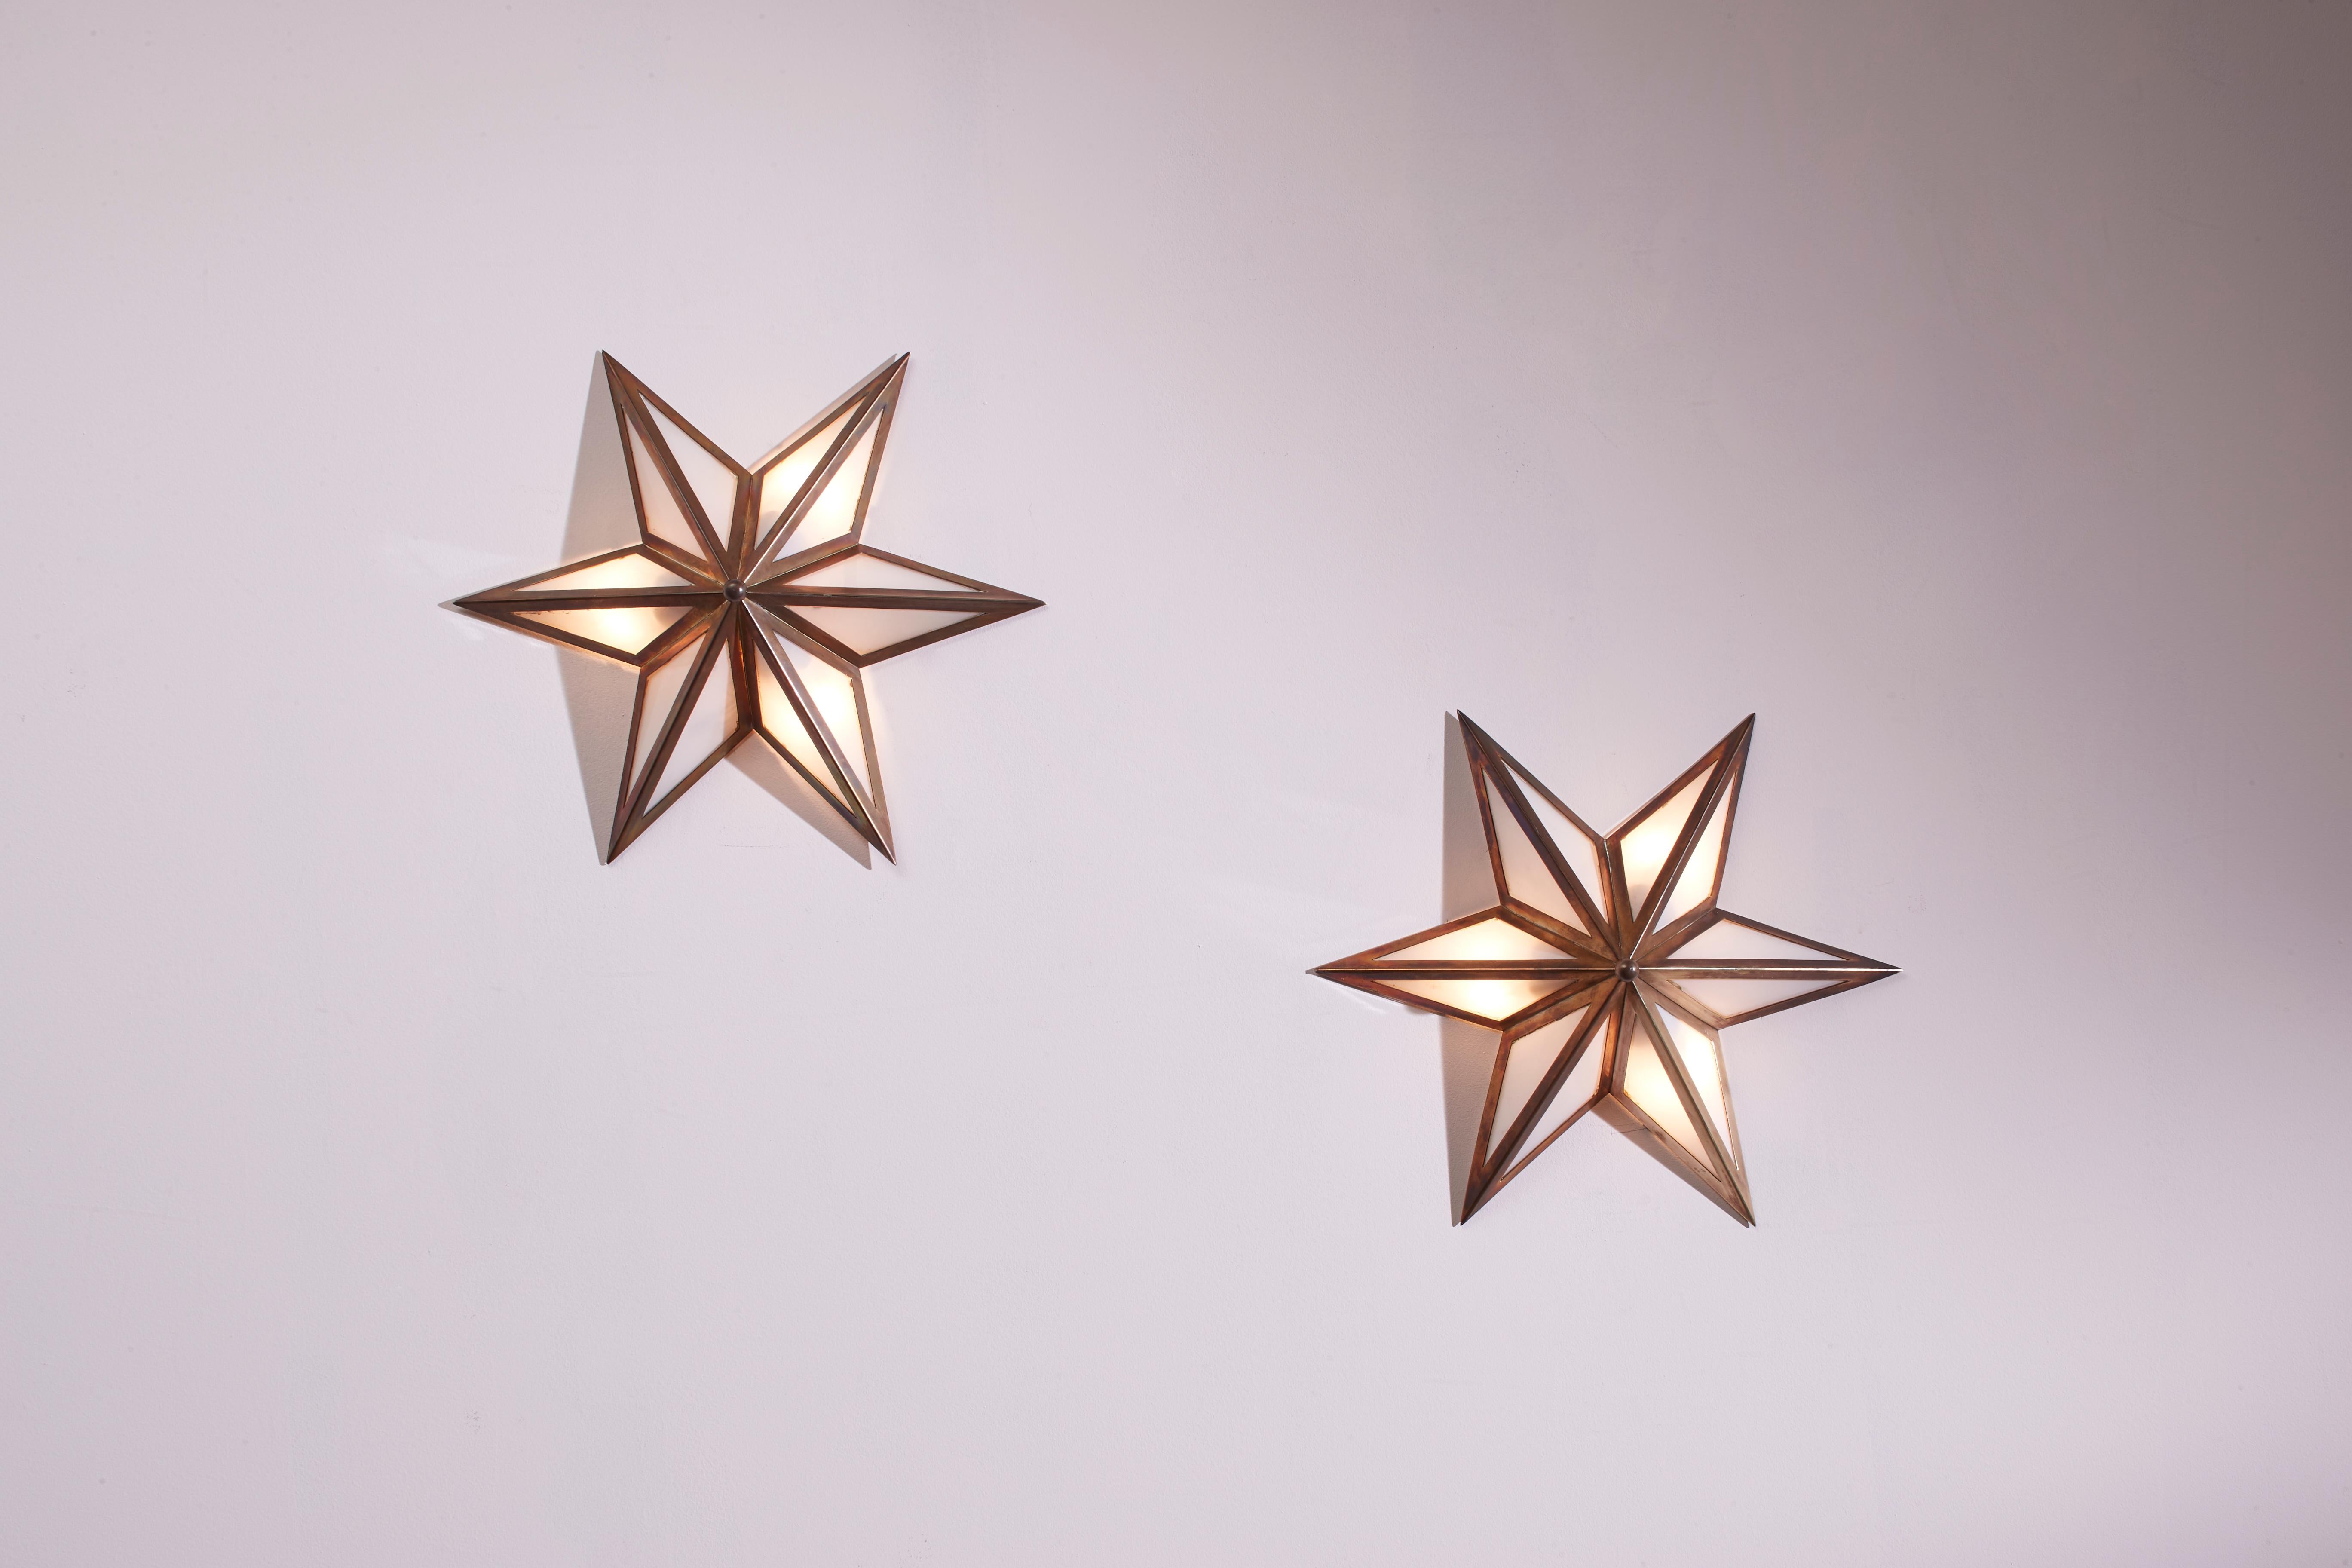 A pair of star-shaped wall sconces, made of brass and glass, represents an authentic example of Italian craftsmanship from the Sixties.

Thin brass profiles frame an opal glass diffuser, shaping a luminous star. This set of wall lamps, two in brass